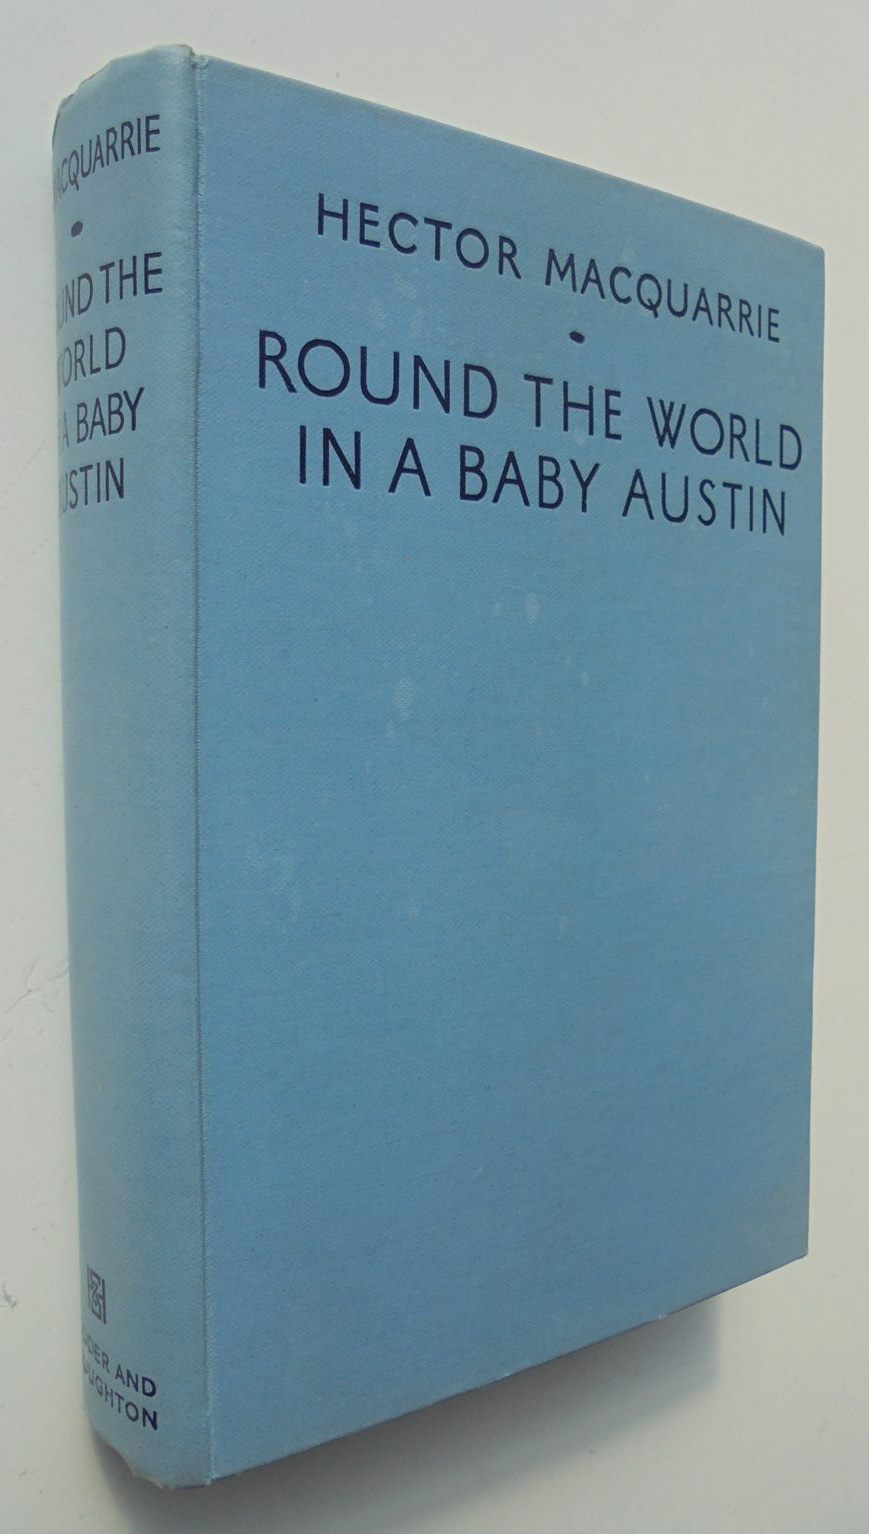 Round the World in a Baby Austin - by Hector MacQuarrie.